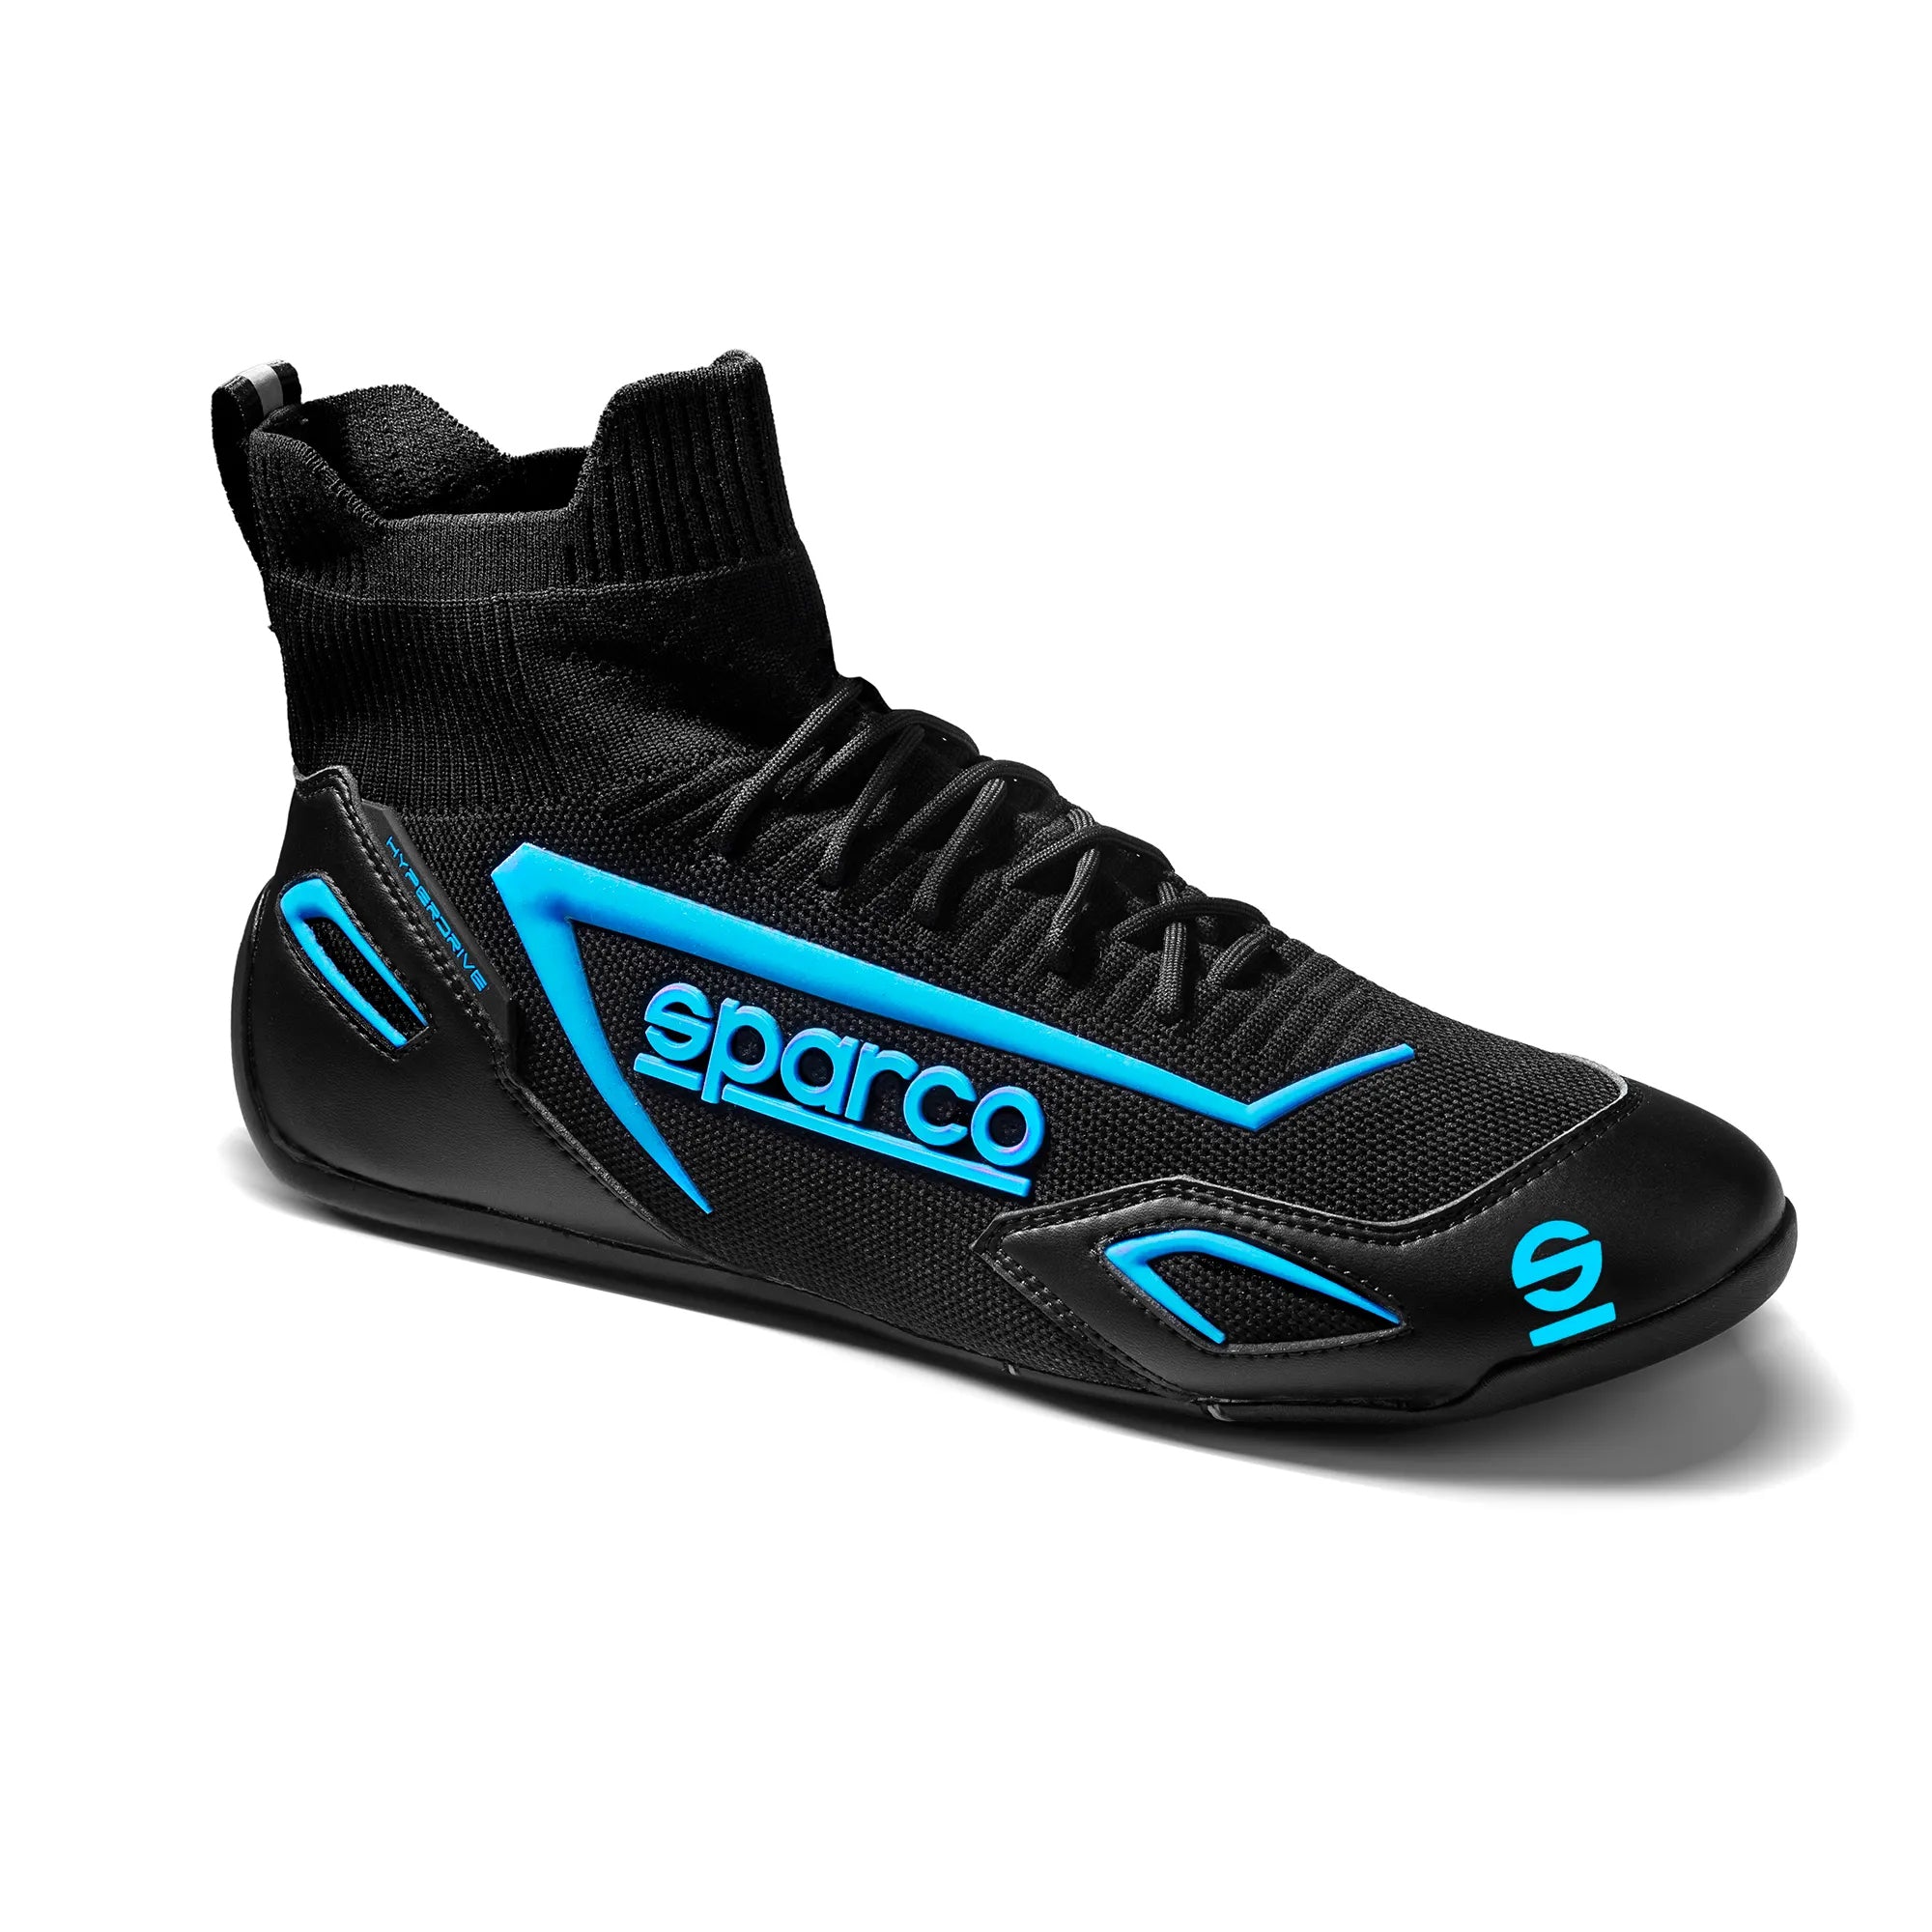 SPARCO 00129342NRAZ Gaming sim racing shoes HYPERDRIVE, black/blue, size 42 Photo-1 